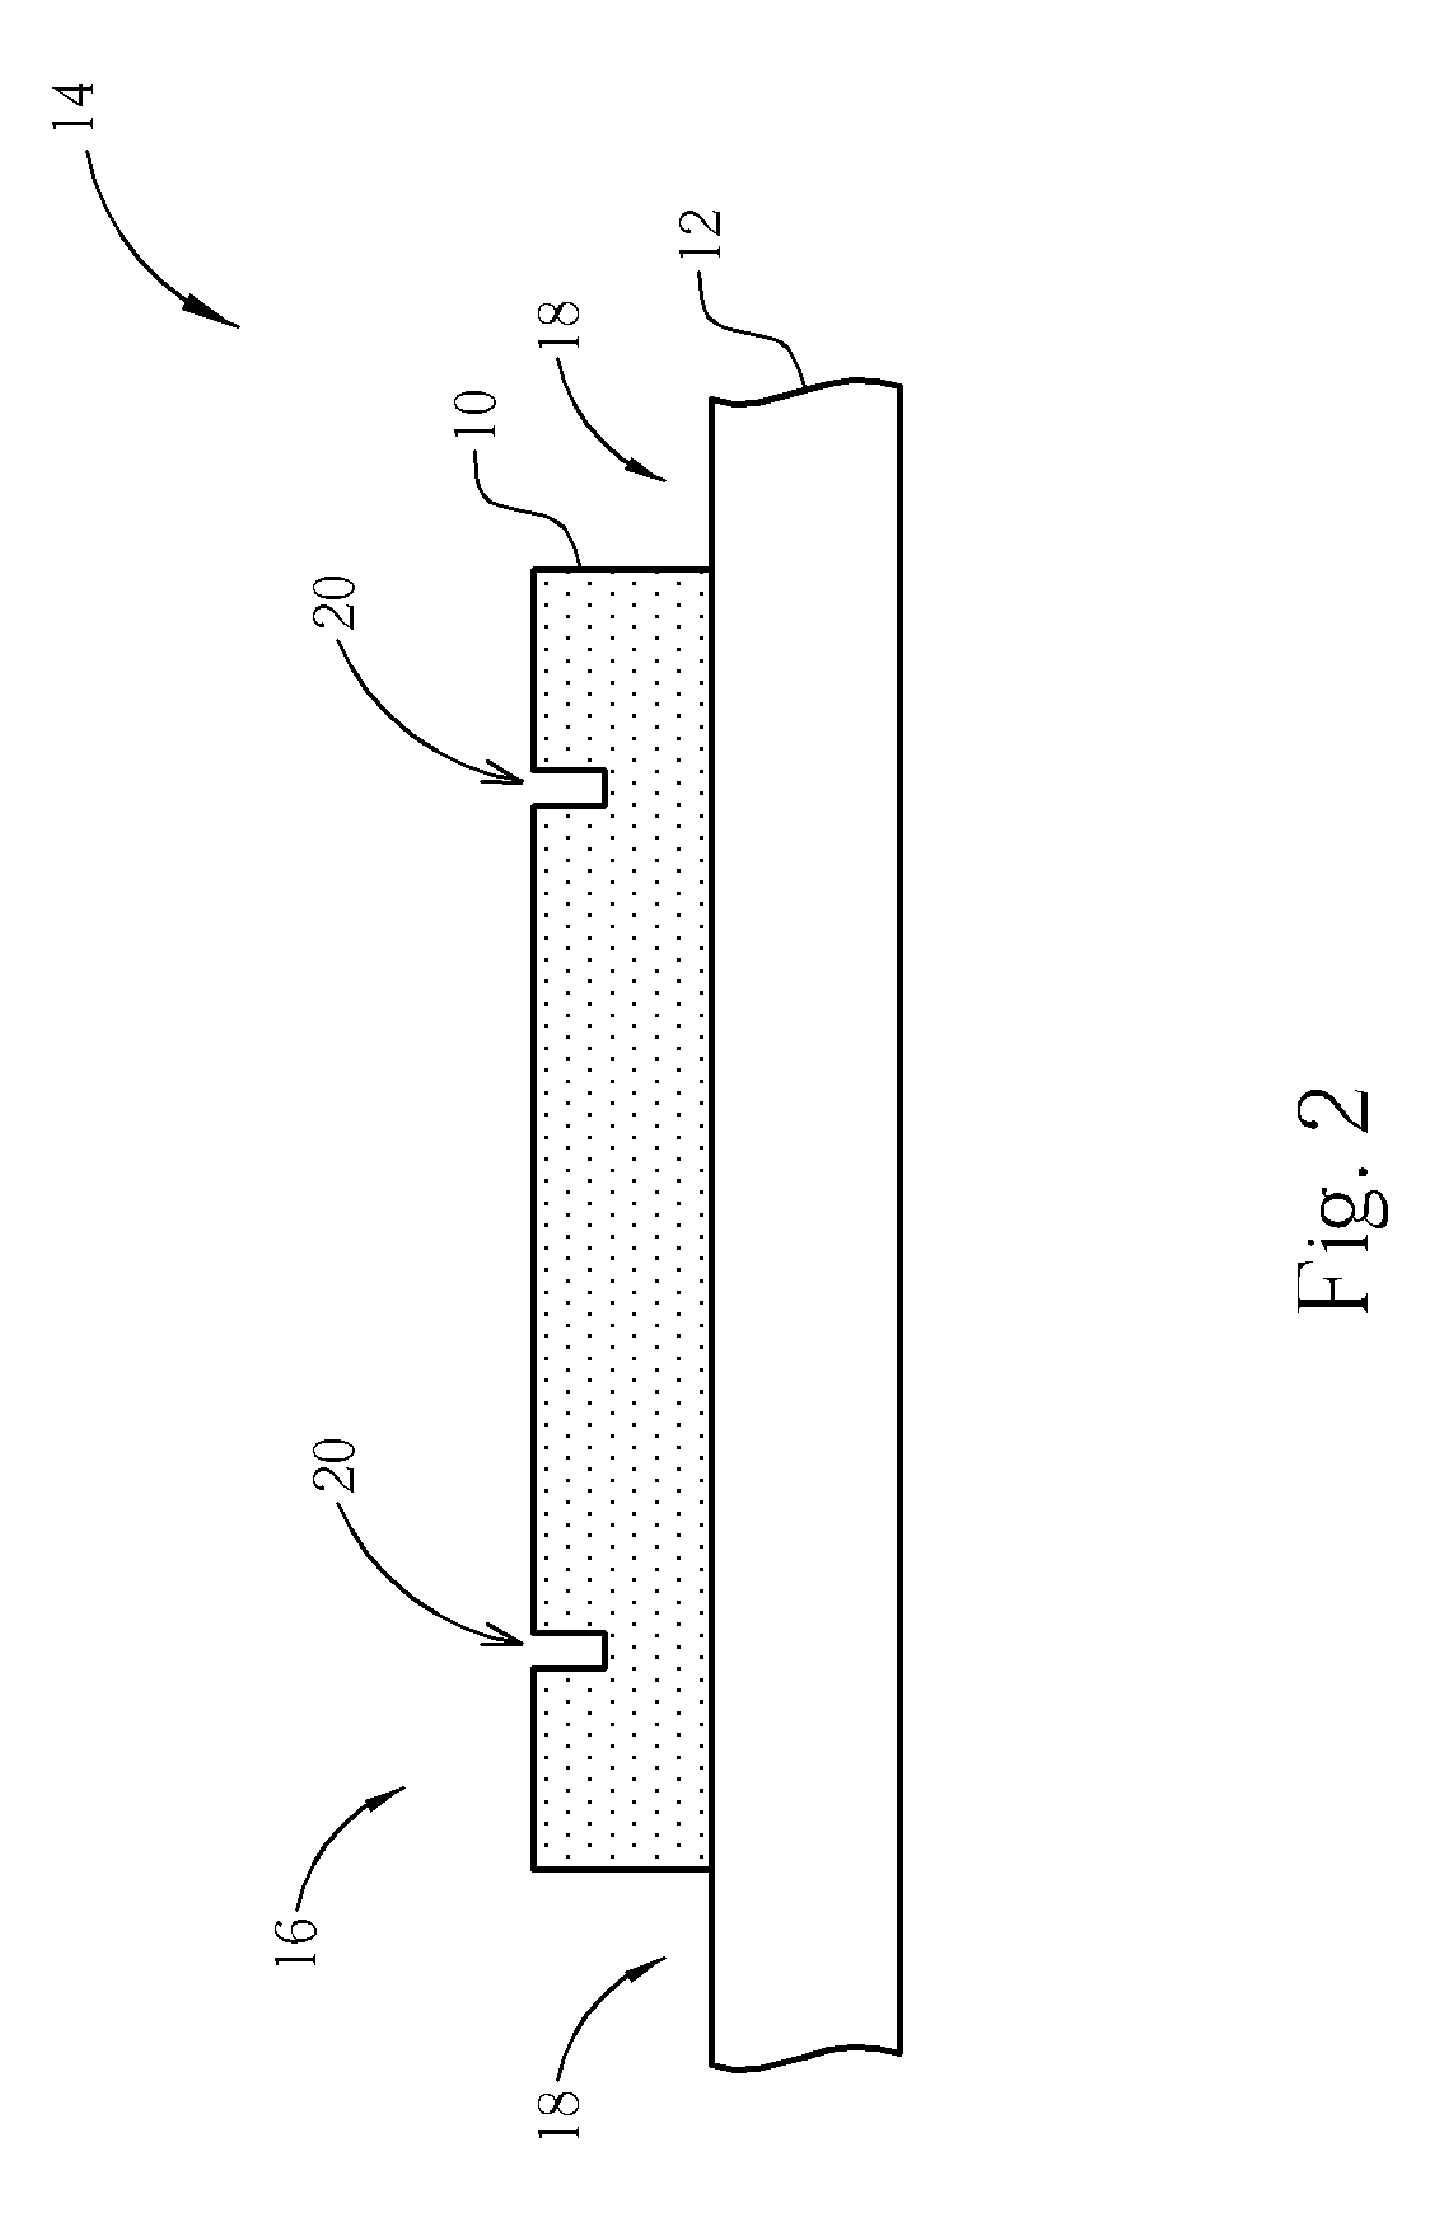 Wafer-level packaging cutting method capable of protecting contact pads